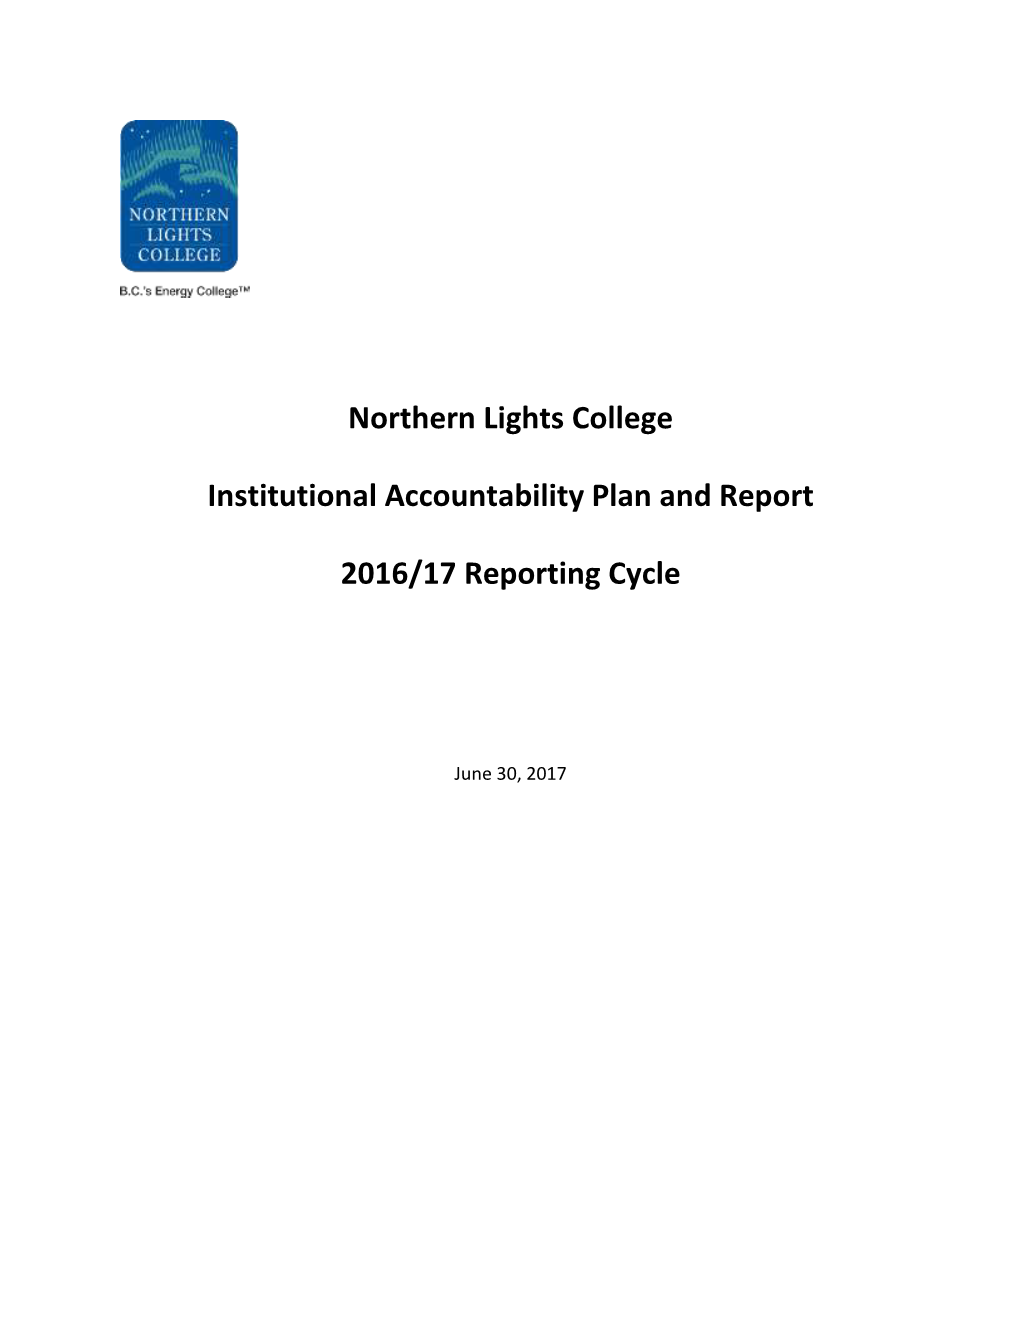 Northern Lights College Institutional Accountability Plan and Report